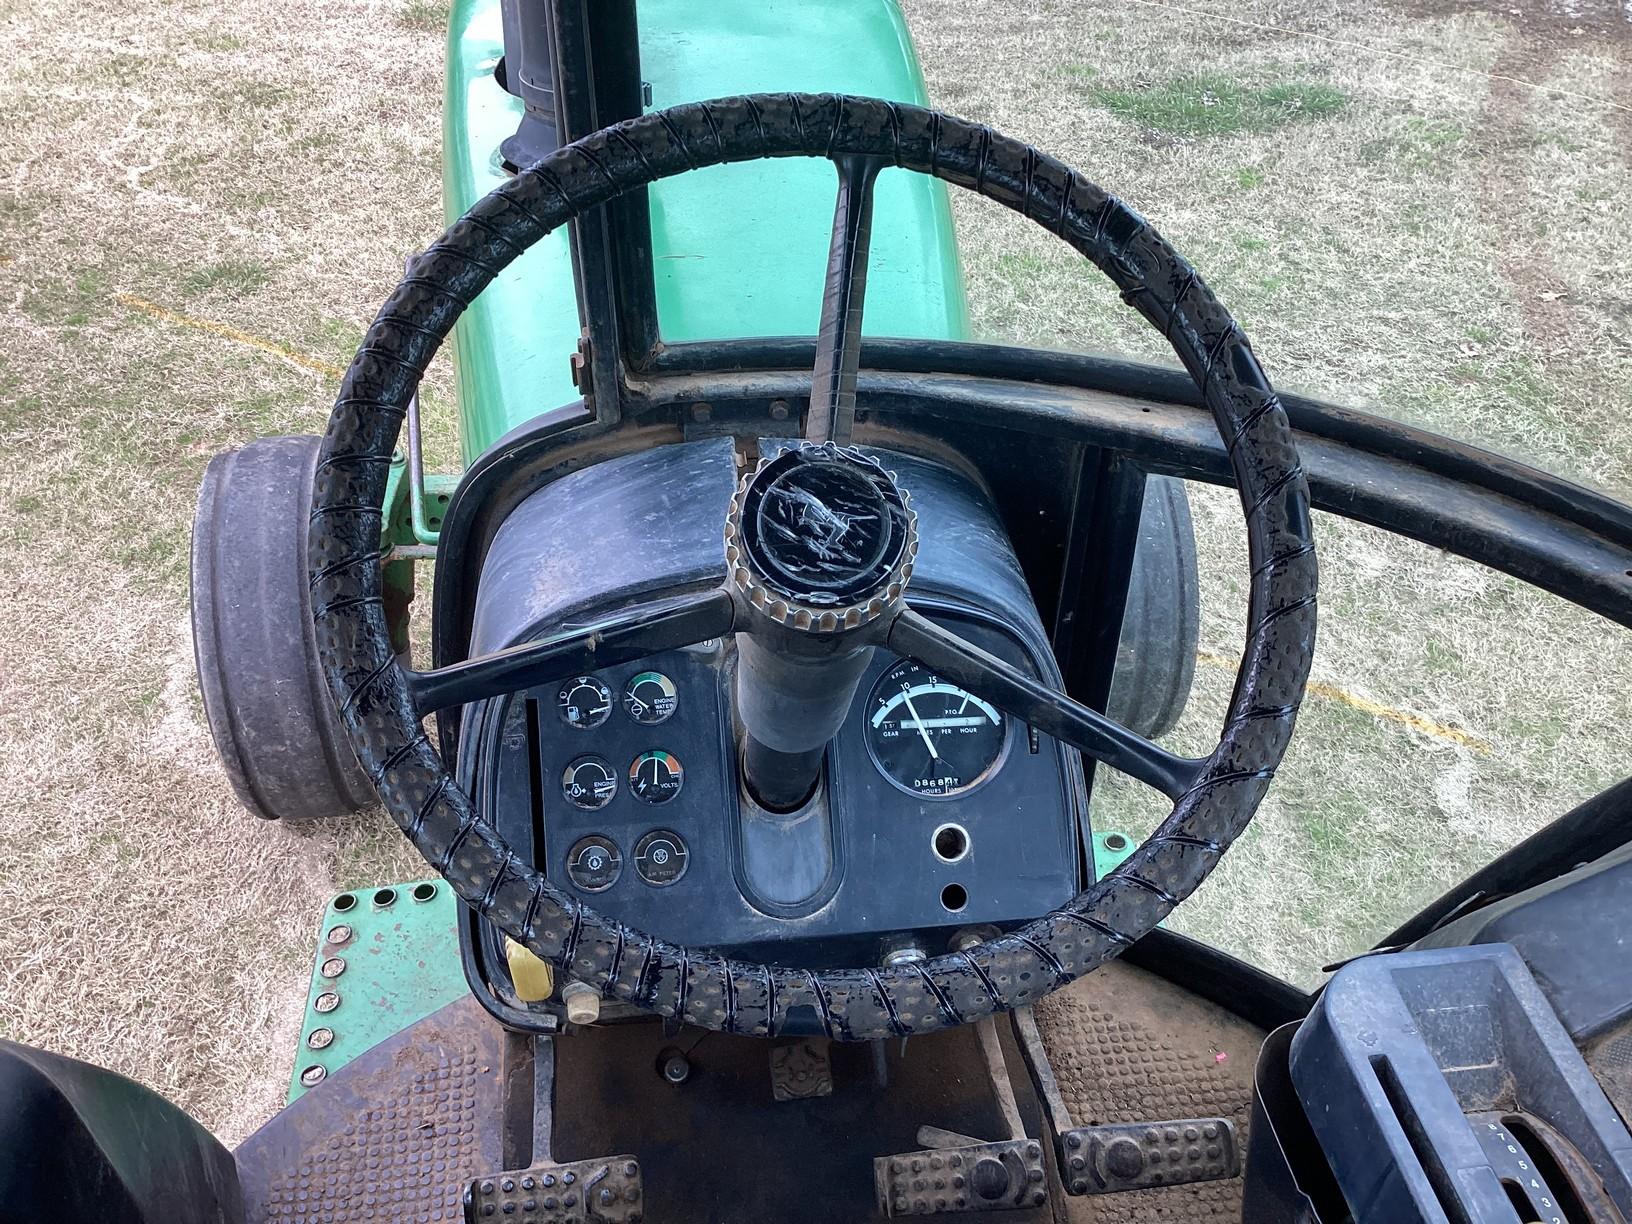 John Deere 4840 Tractor Hours unknown - 868 hours showing, Powershift